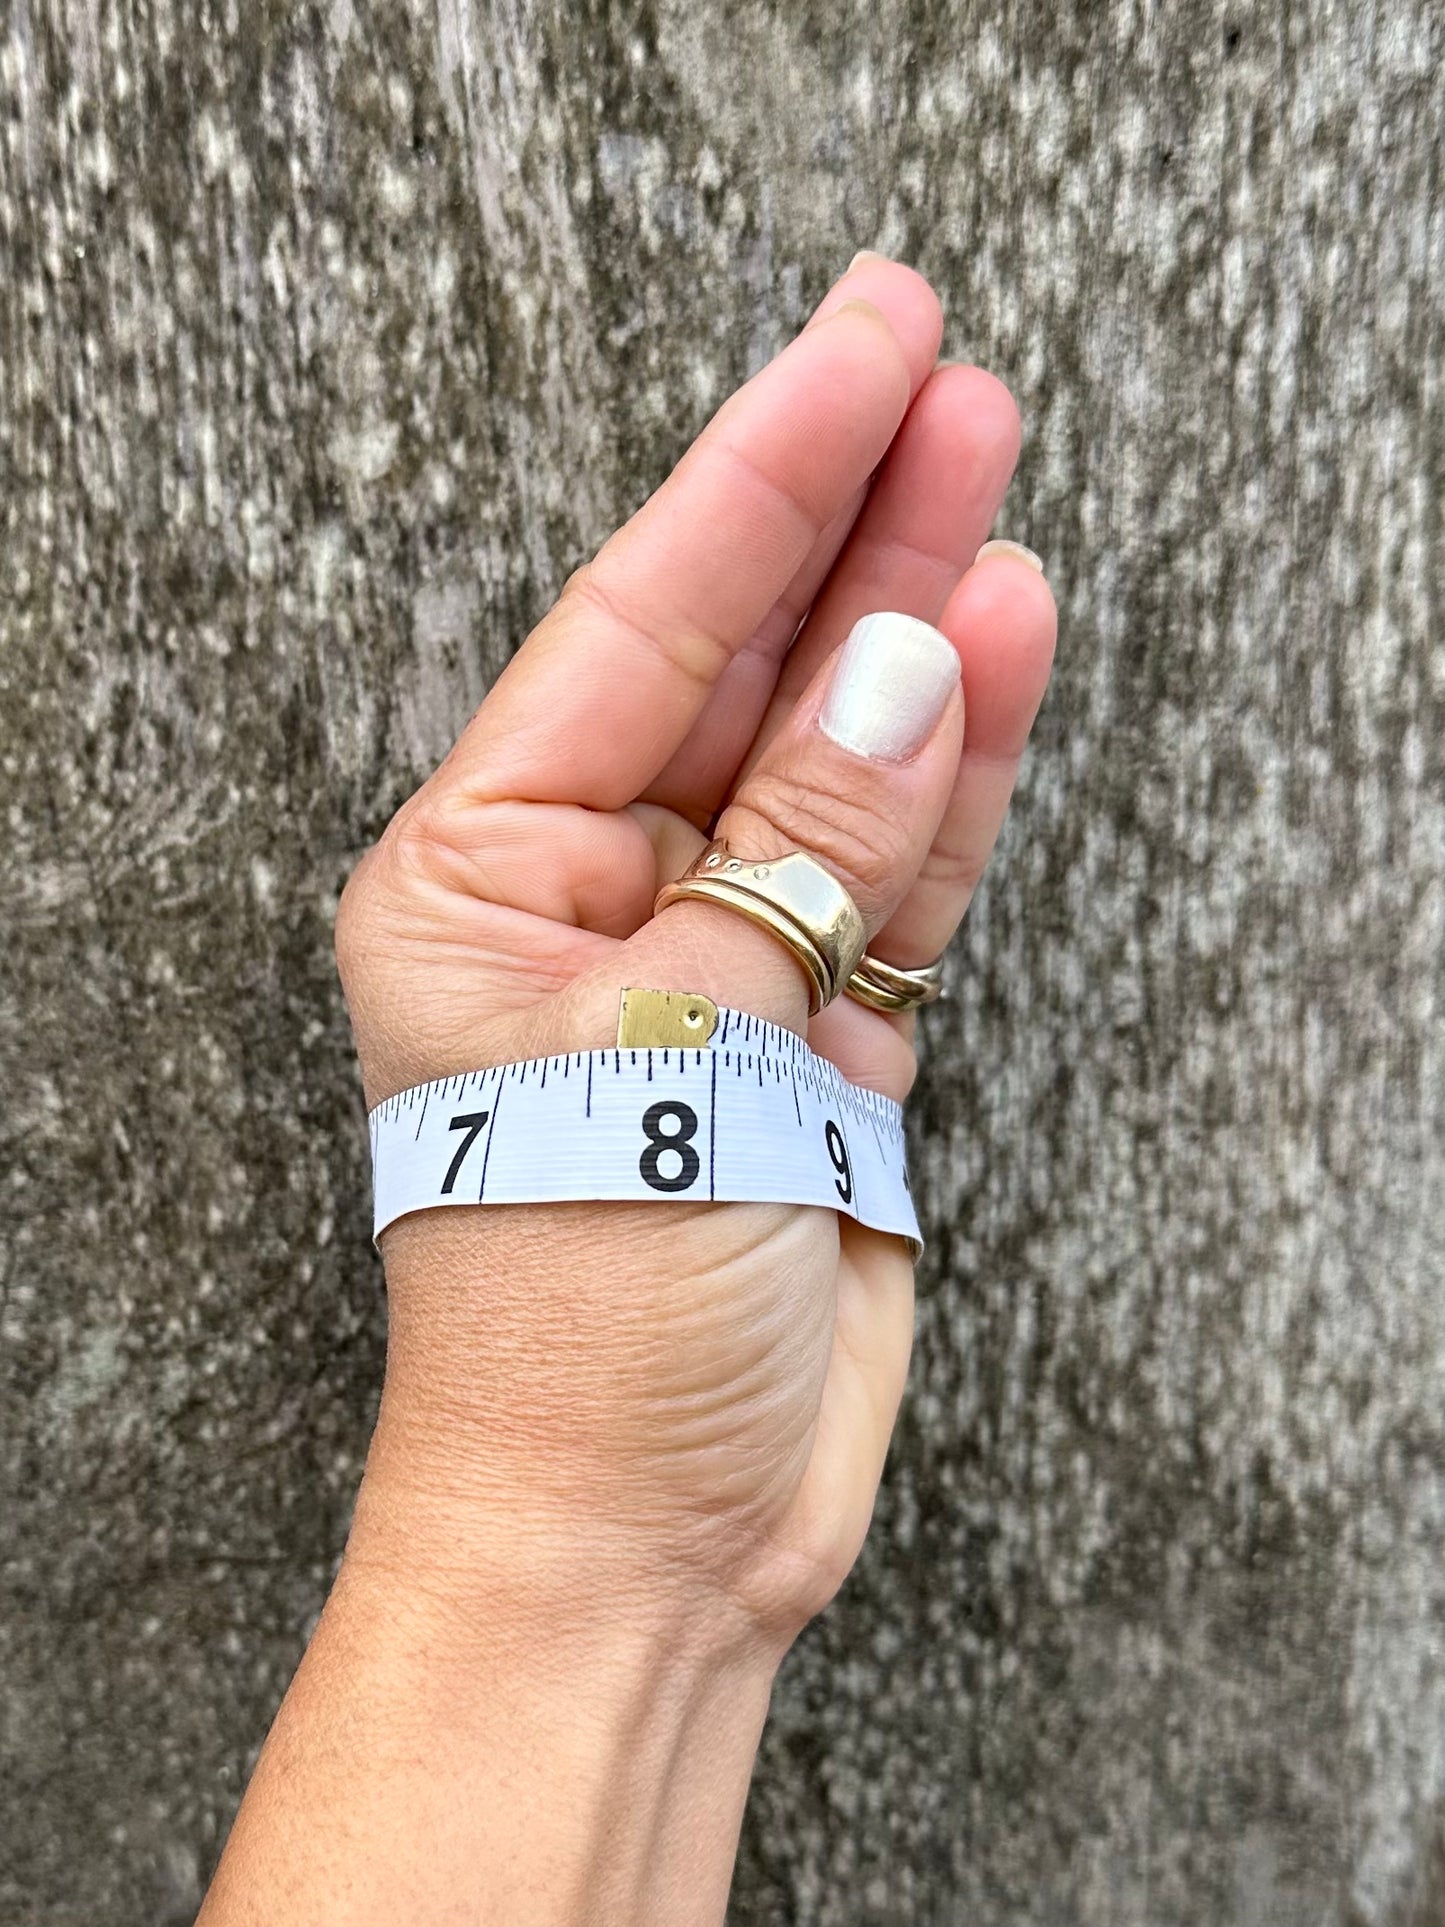  a hand is held up with thumb and pinky touching. there is a tape measure wraped around the largest part of the hand and it shows a 7 and a half measurement. the hand is onfront of a wooden board